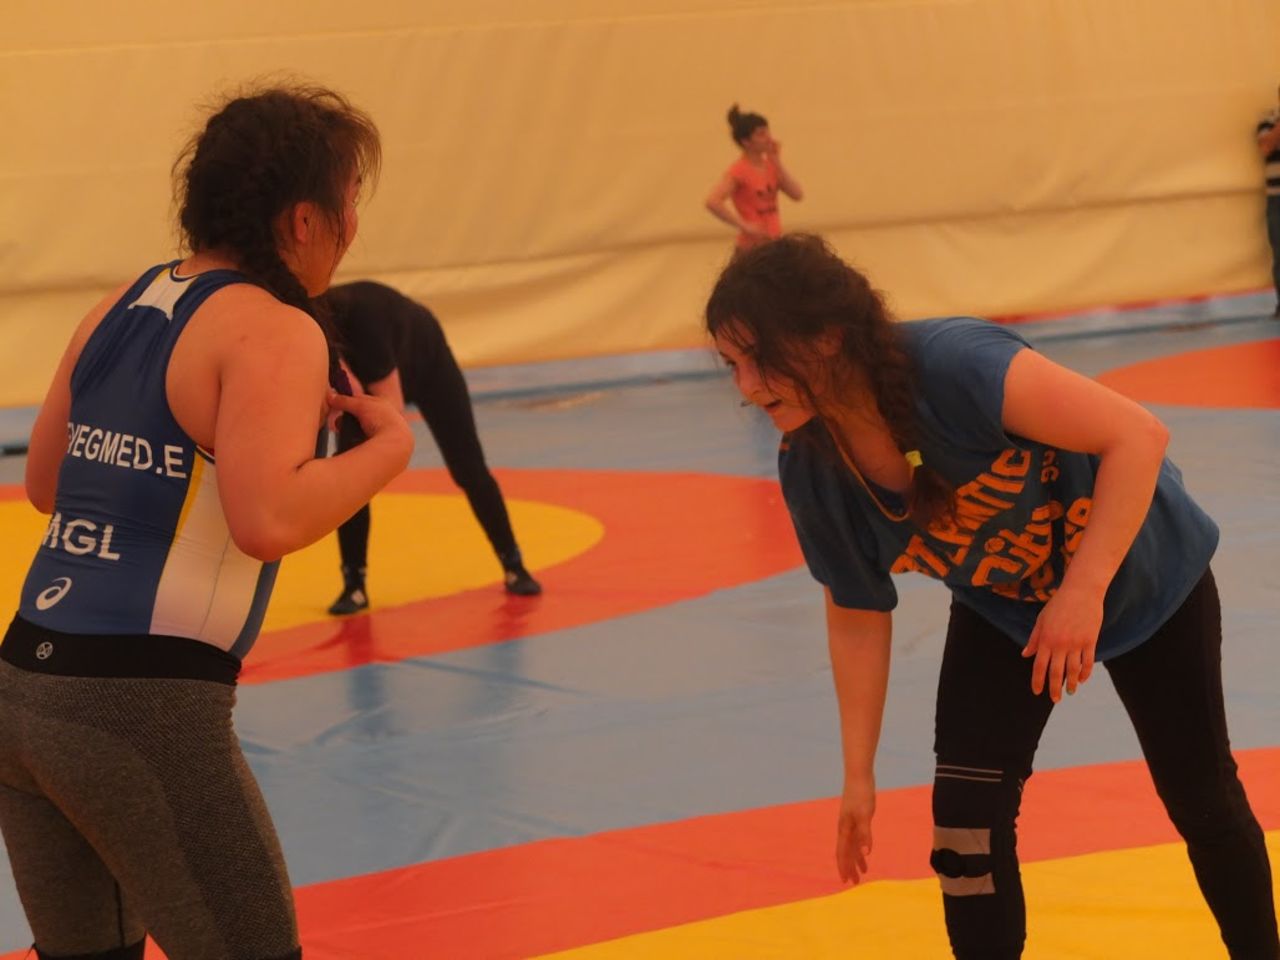 In a traditionally conservative country the growth of young women competitors in a formerly male-dominated sport such as wrestling is considered groundbreaking.